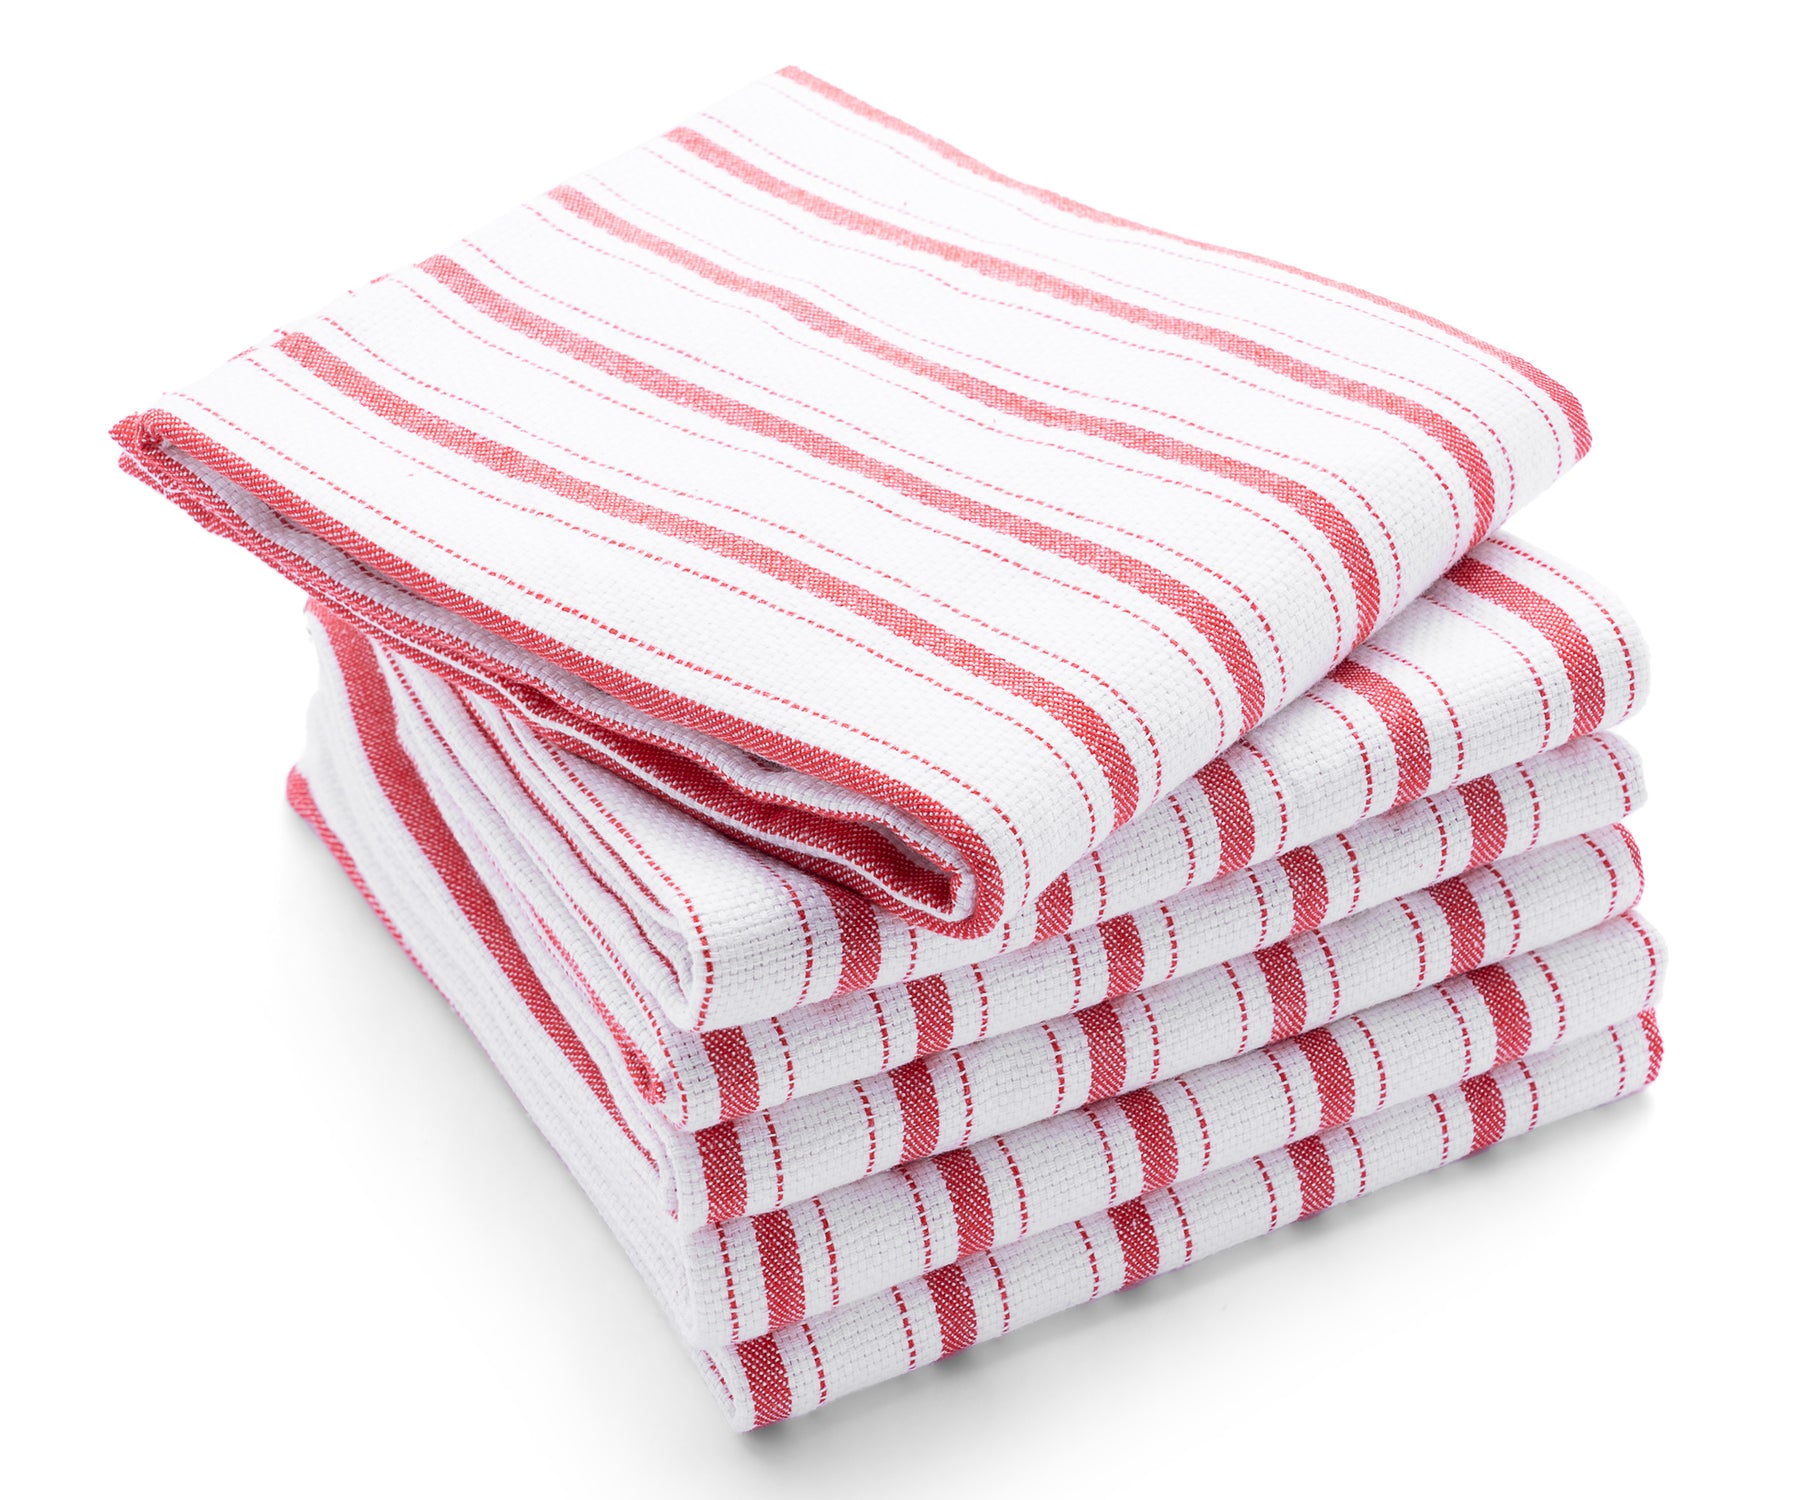 cloth dish towels, red kitchen towels striped, striped cotton kitchen towels, best dish towels for drying, red dish towels for kitchen, red tea towels cotton